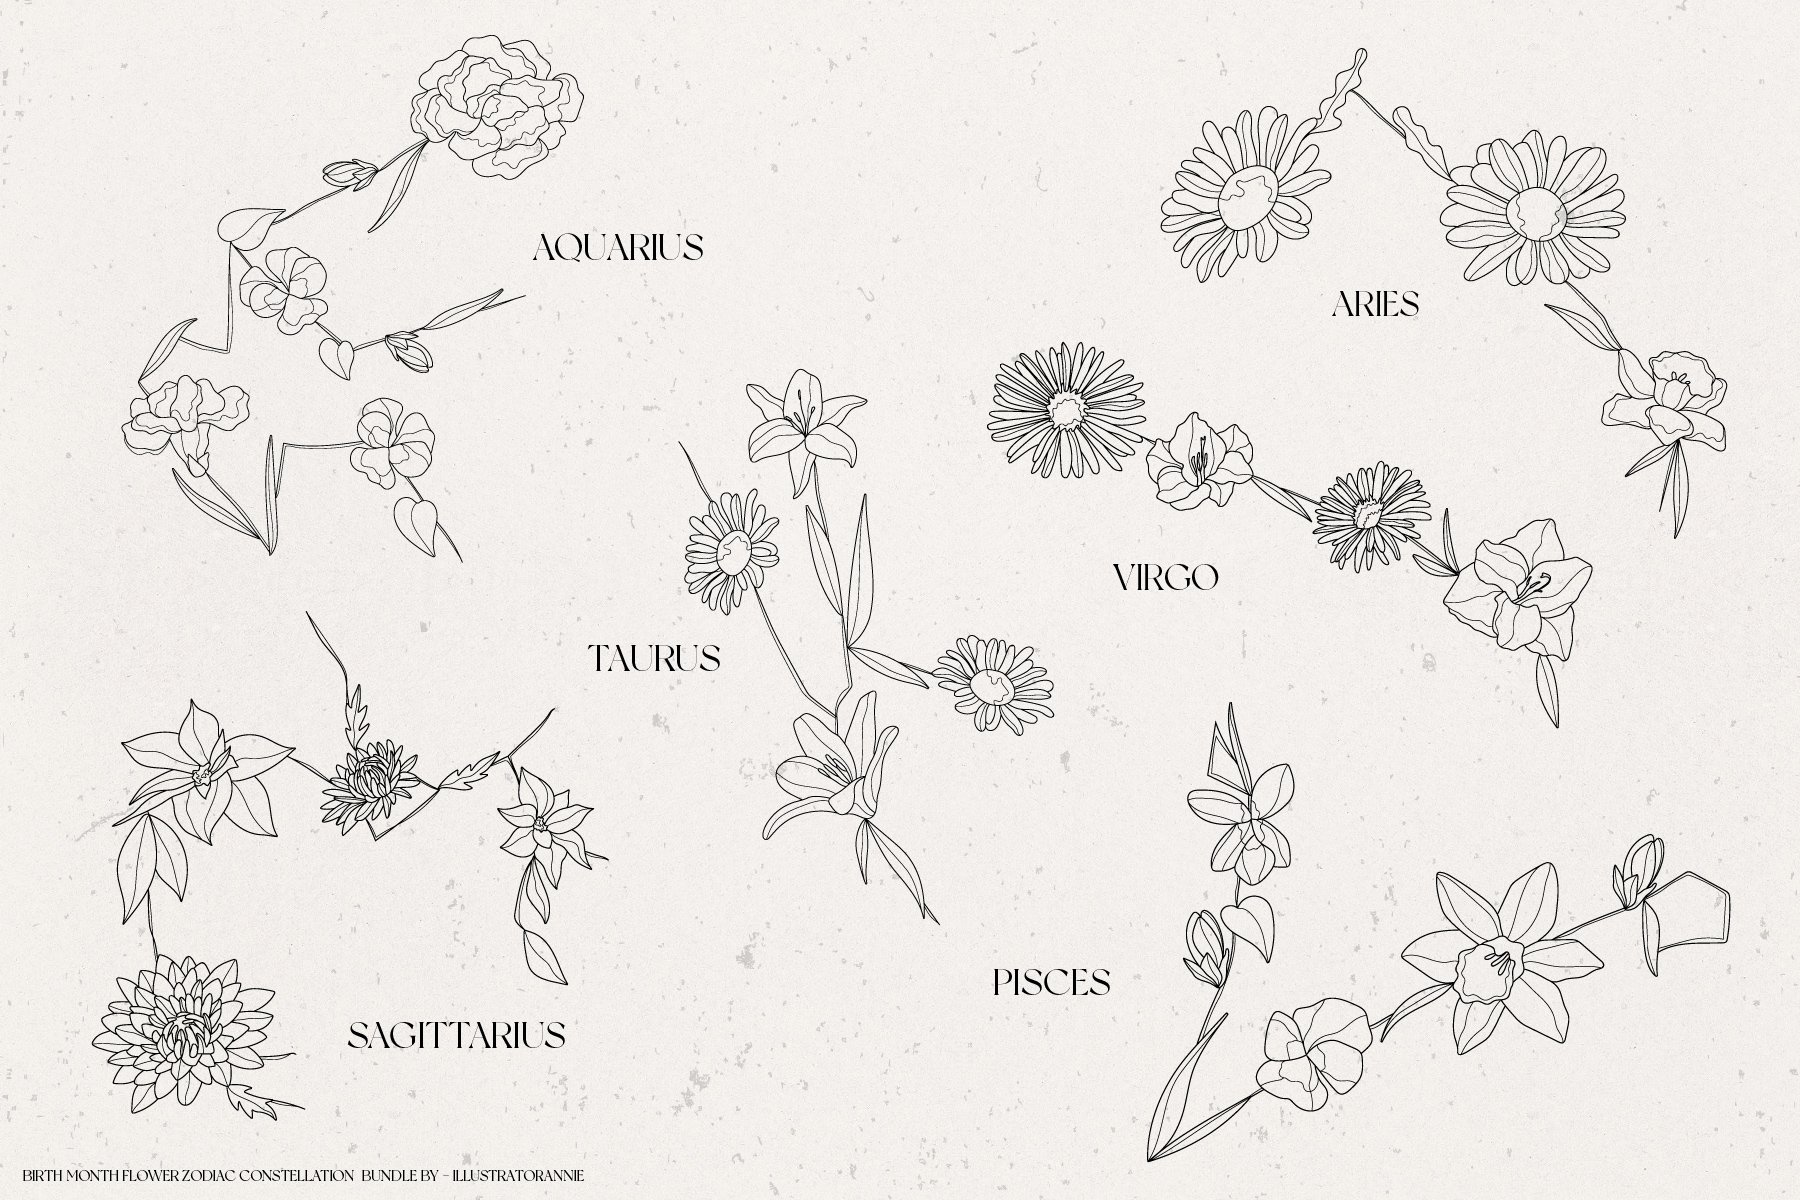 Cool hand drawn flowers for your zodiac composition.